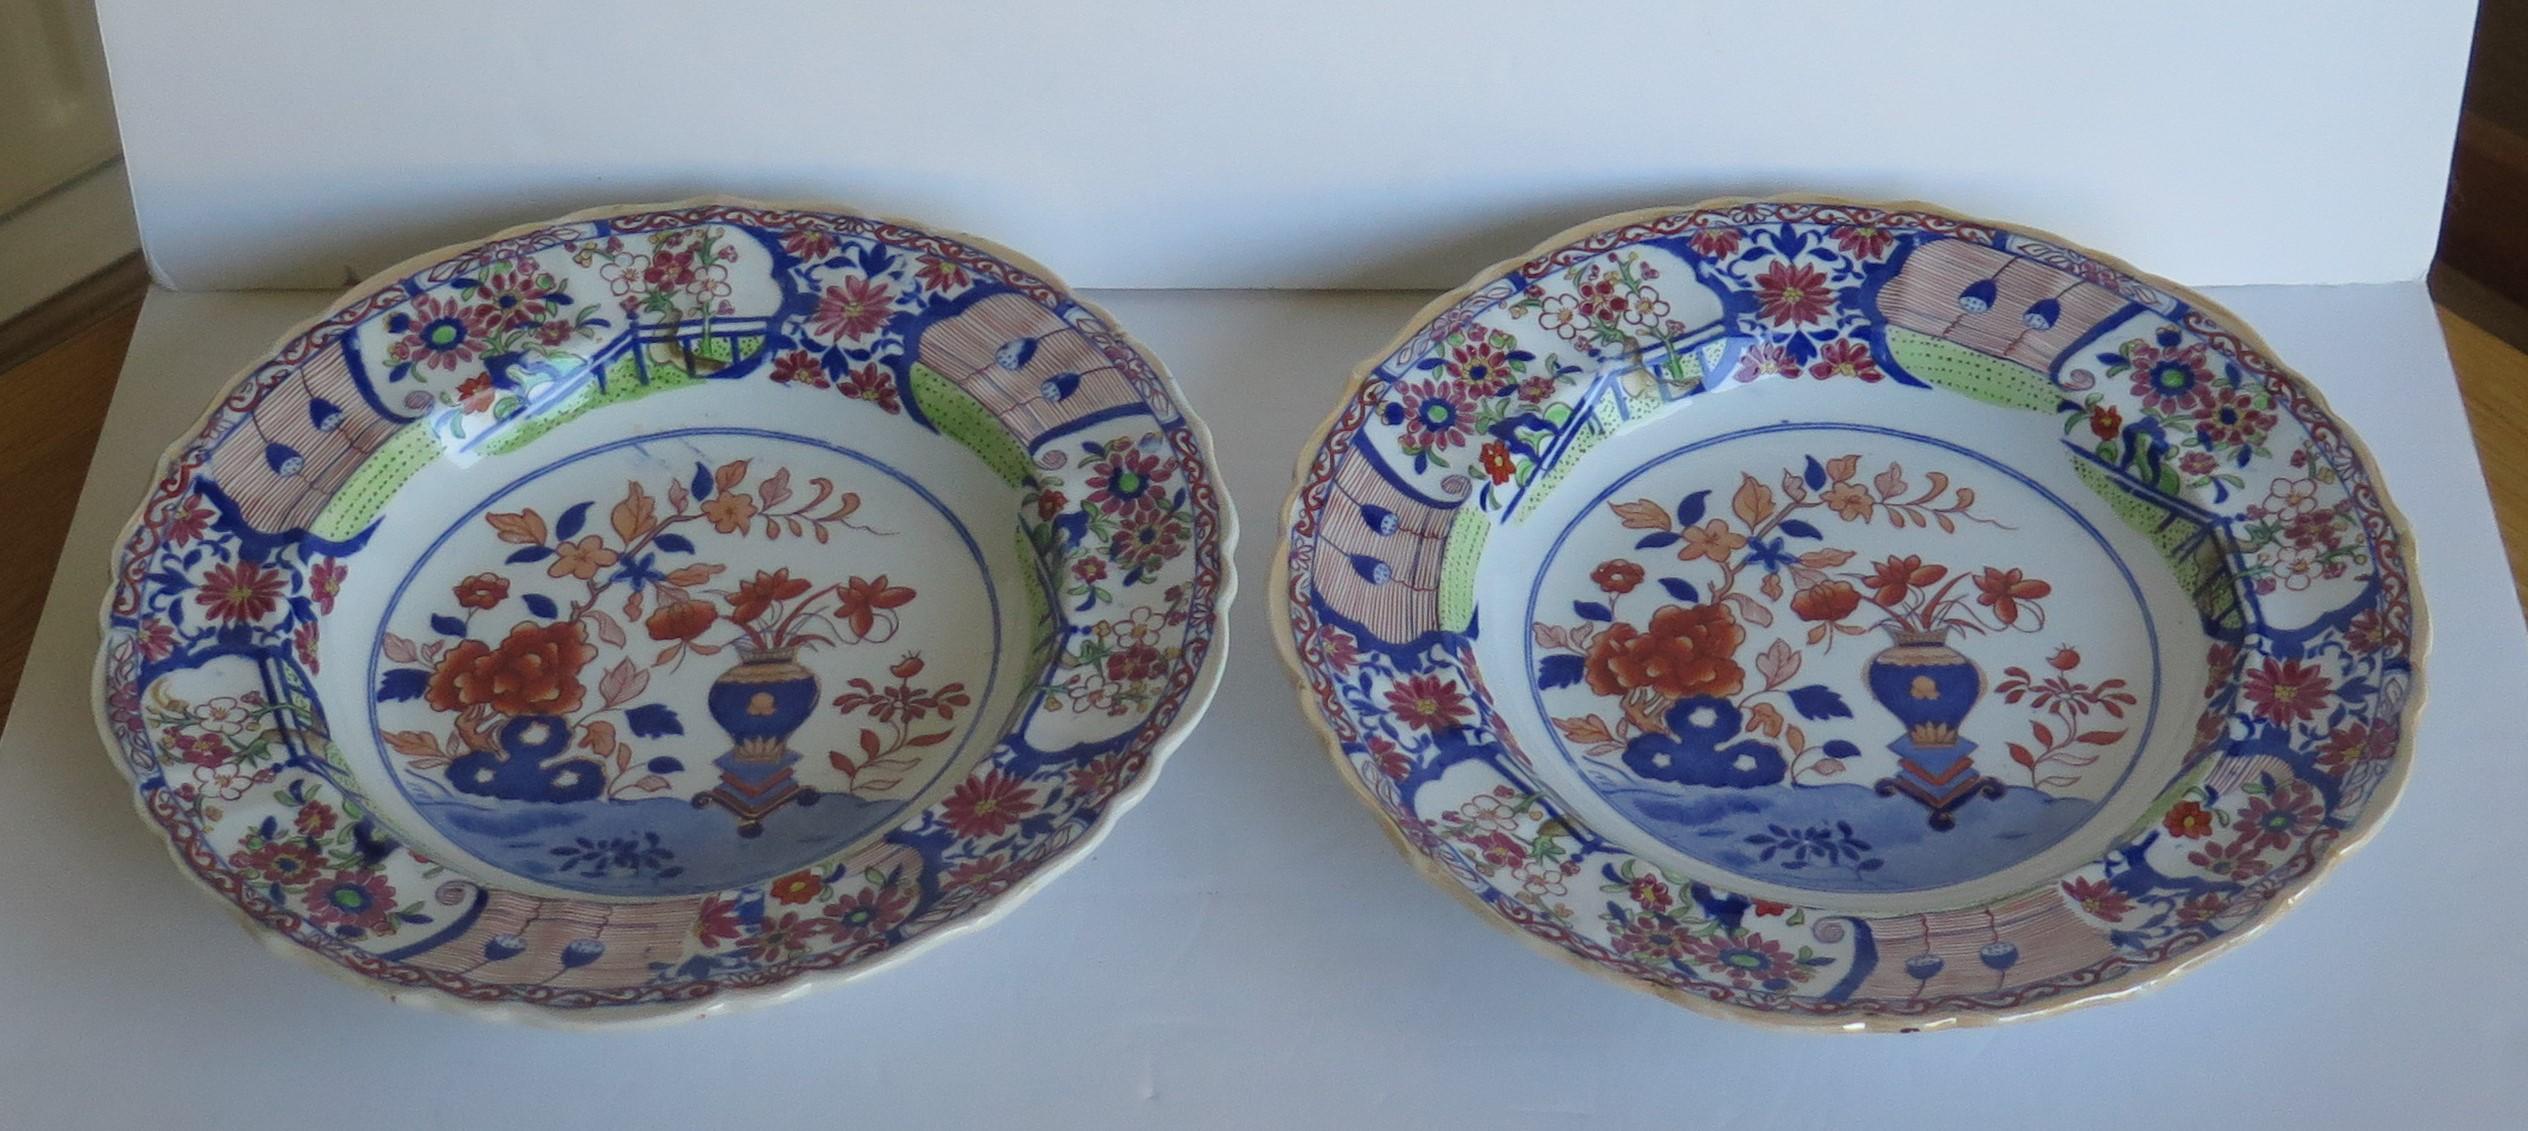 This is an early and very decorative pair of ironstone pottery large soup bowls or deep plates, a produced by the Mason's factory at Lane Delph, Staffordshire, England, circa 1815 to 1820.

The plates are circular with a slightly fluted outer rim